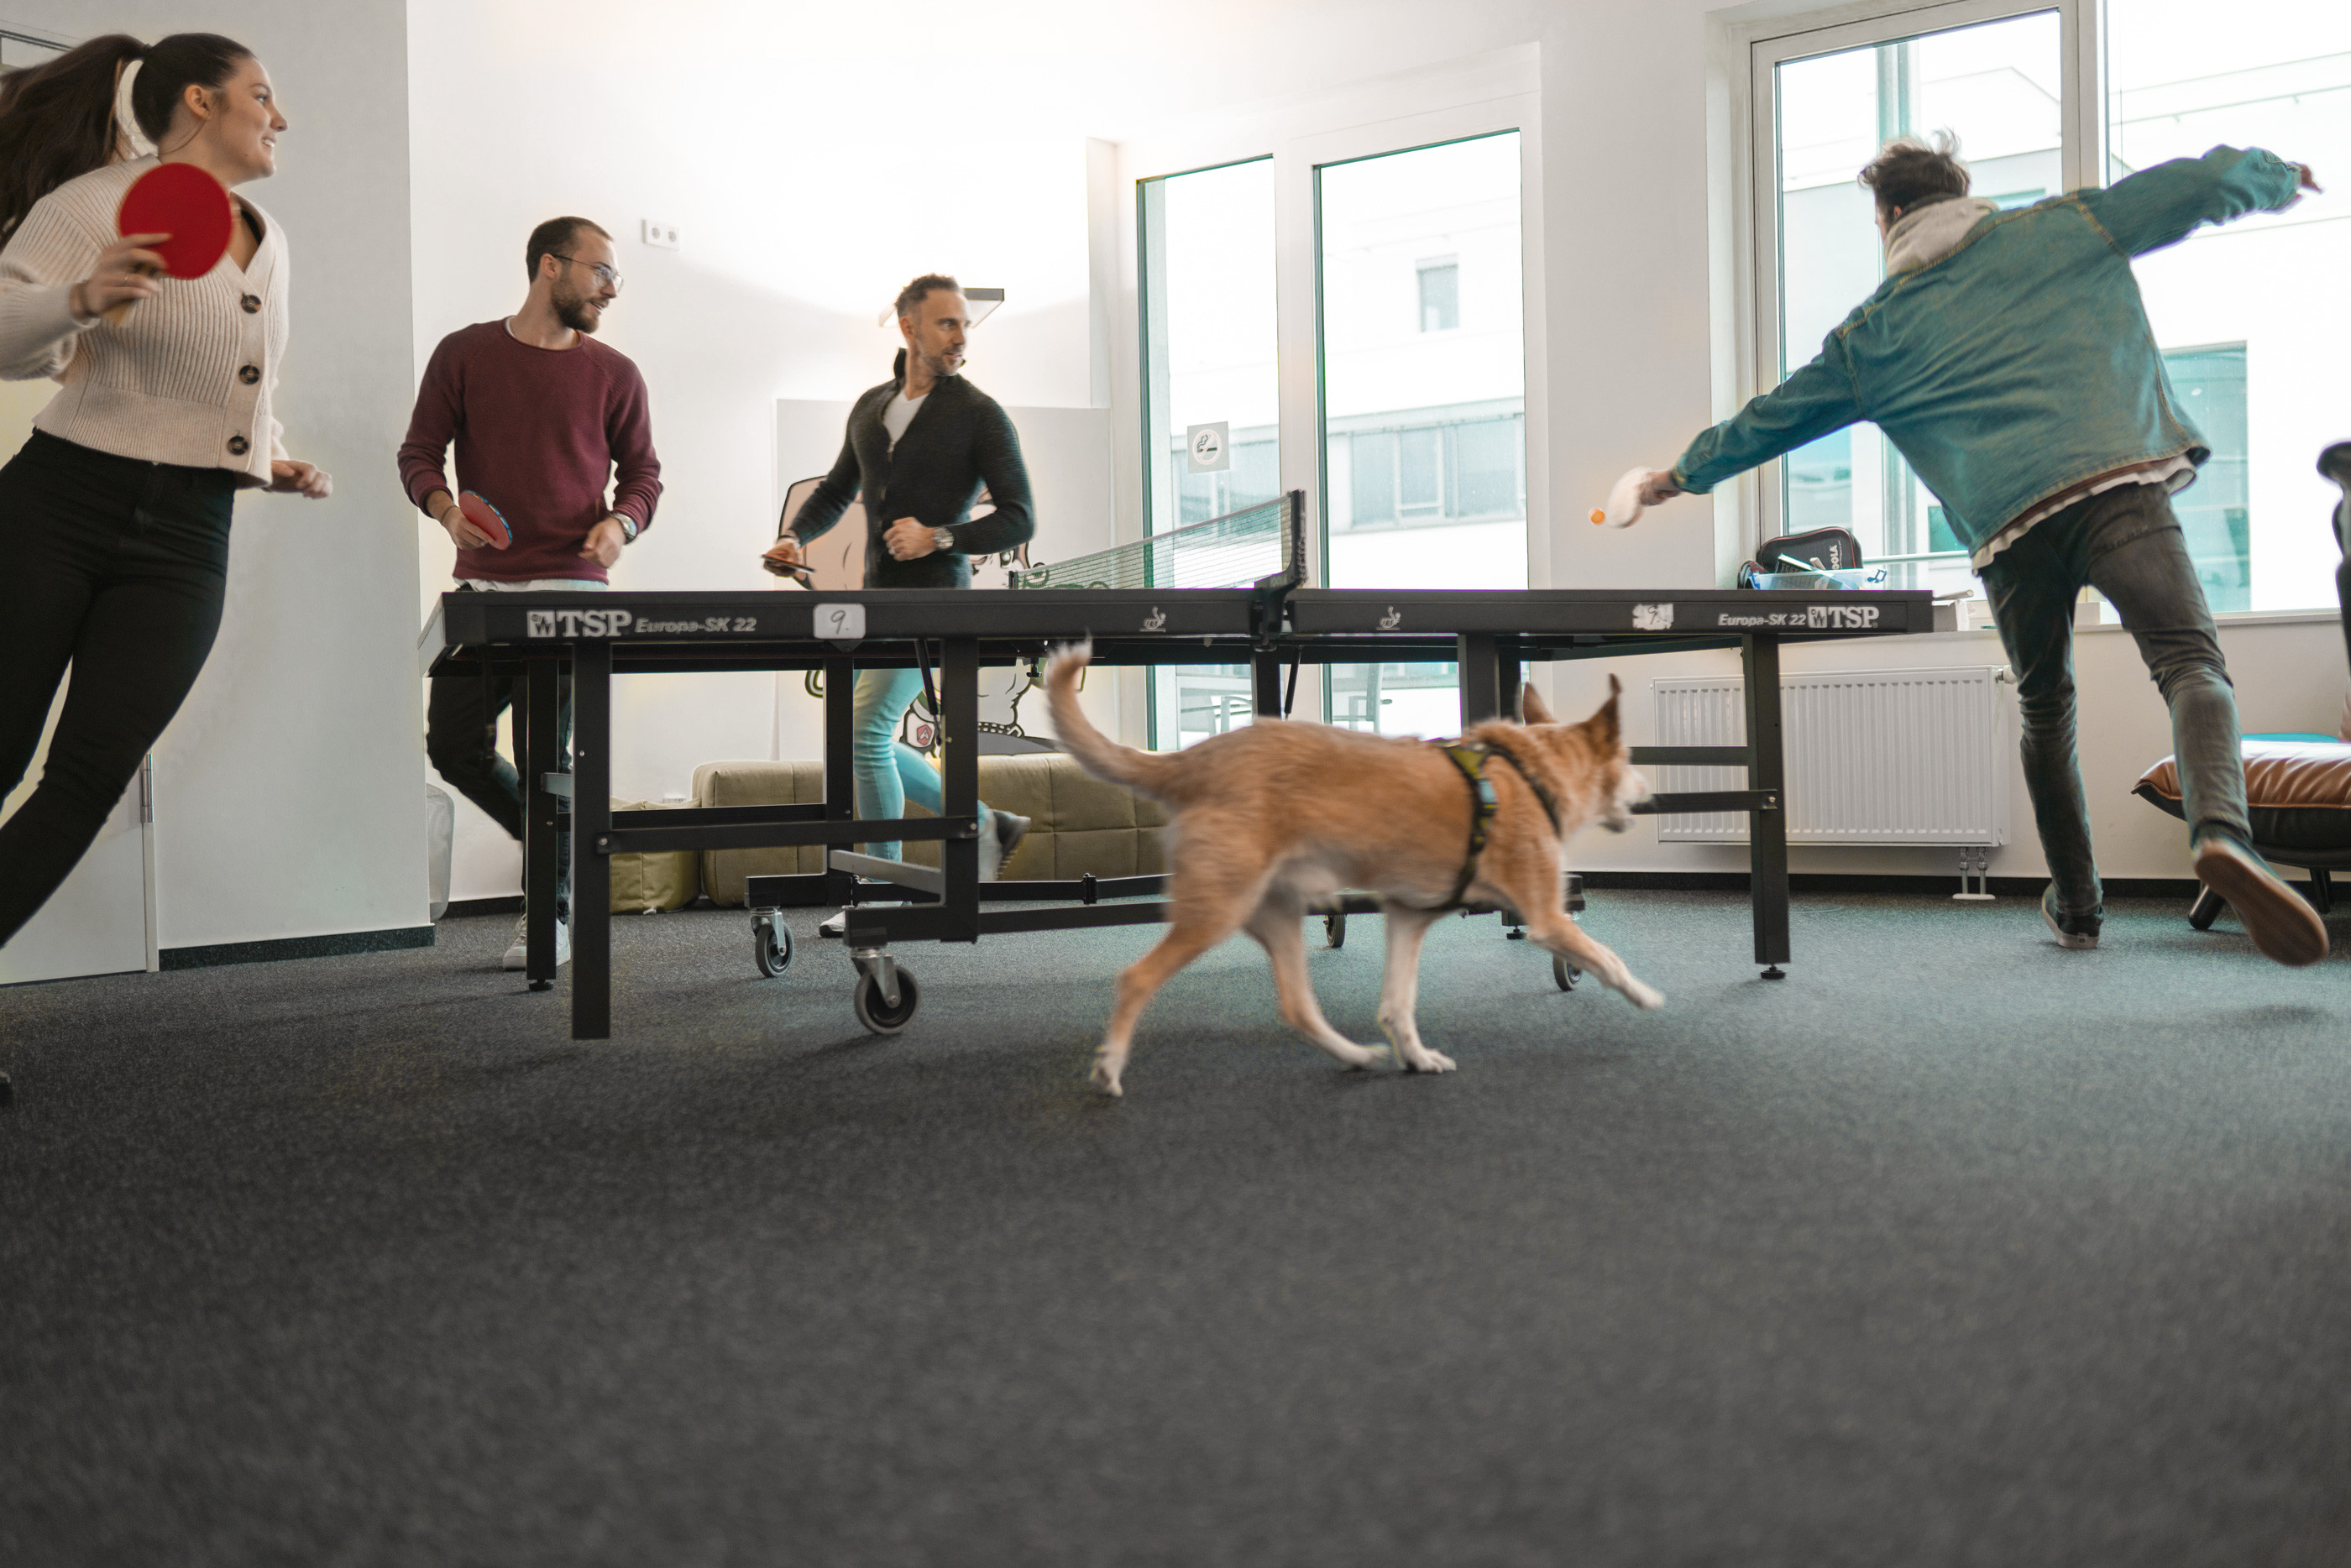 aartin seyfarth and team playing table tennis in the office